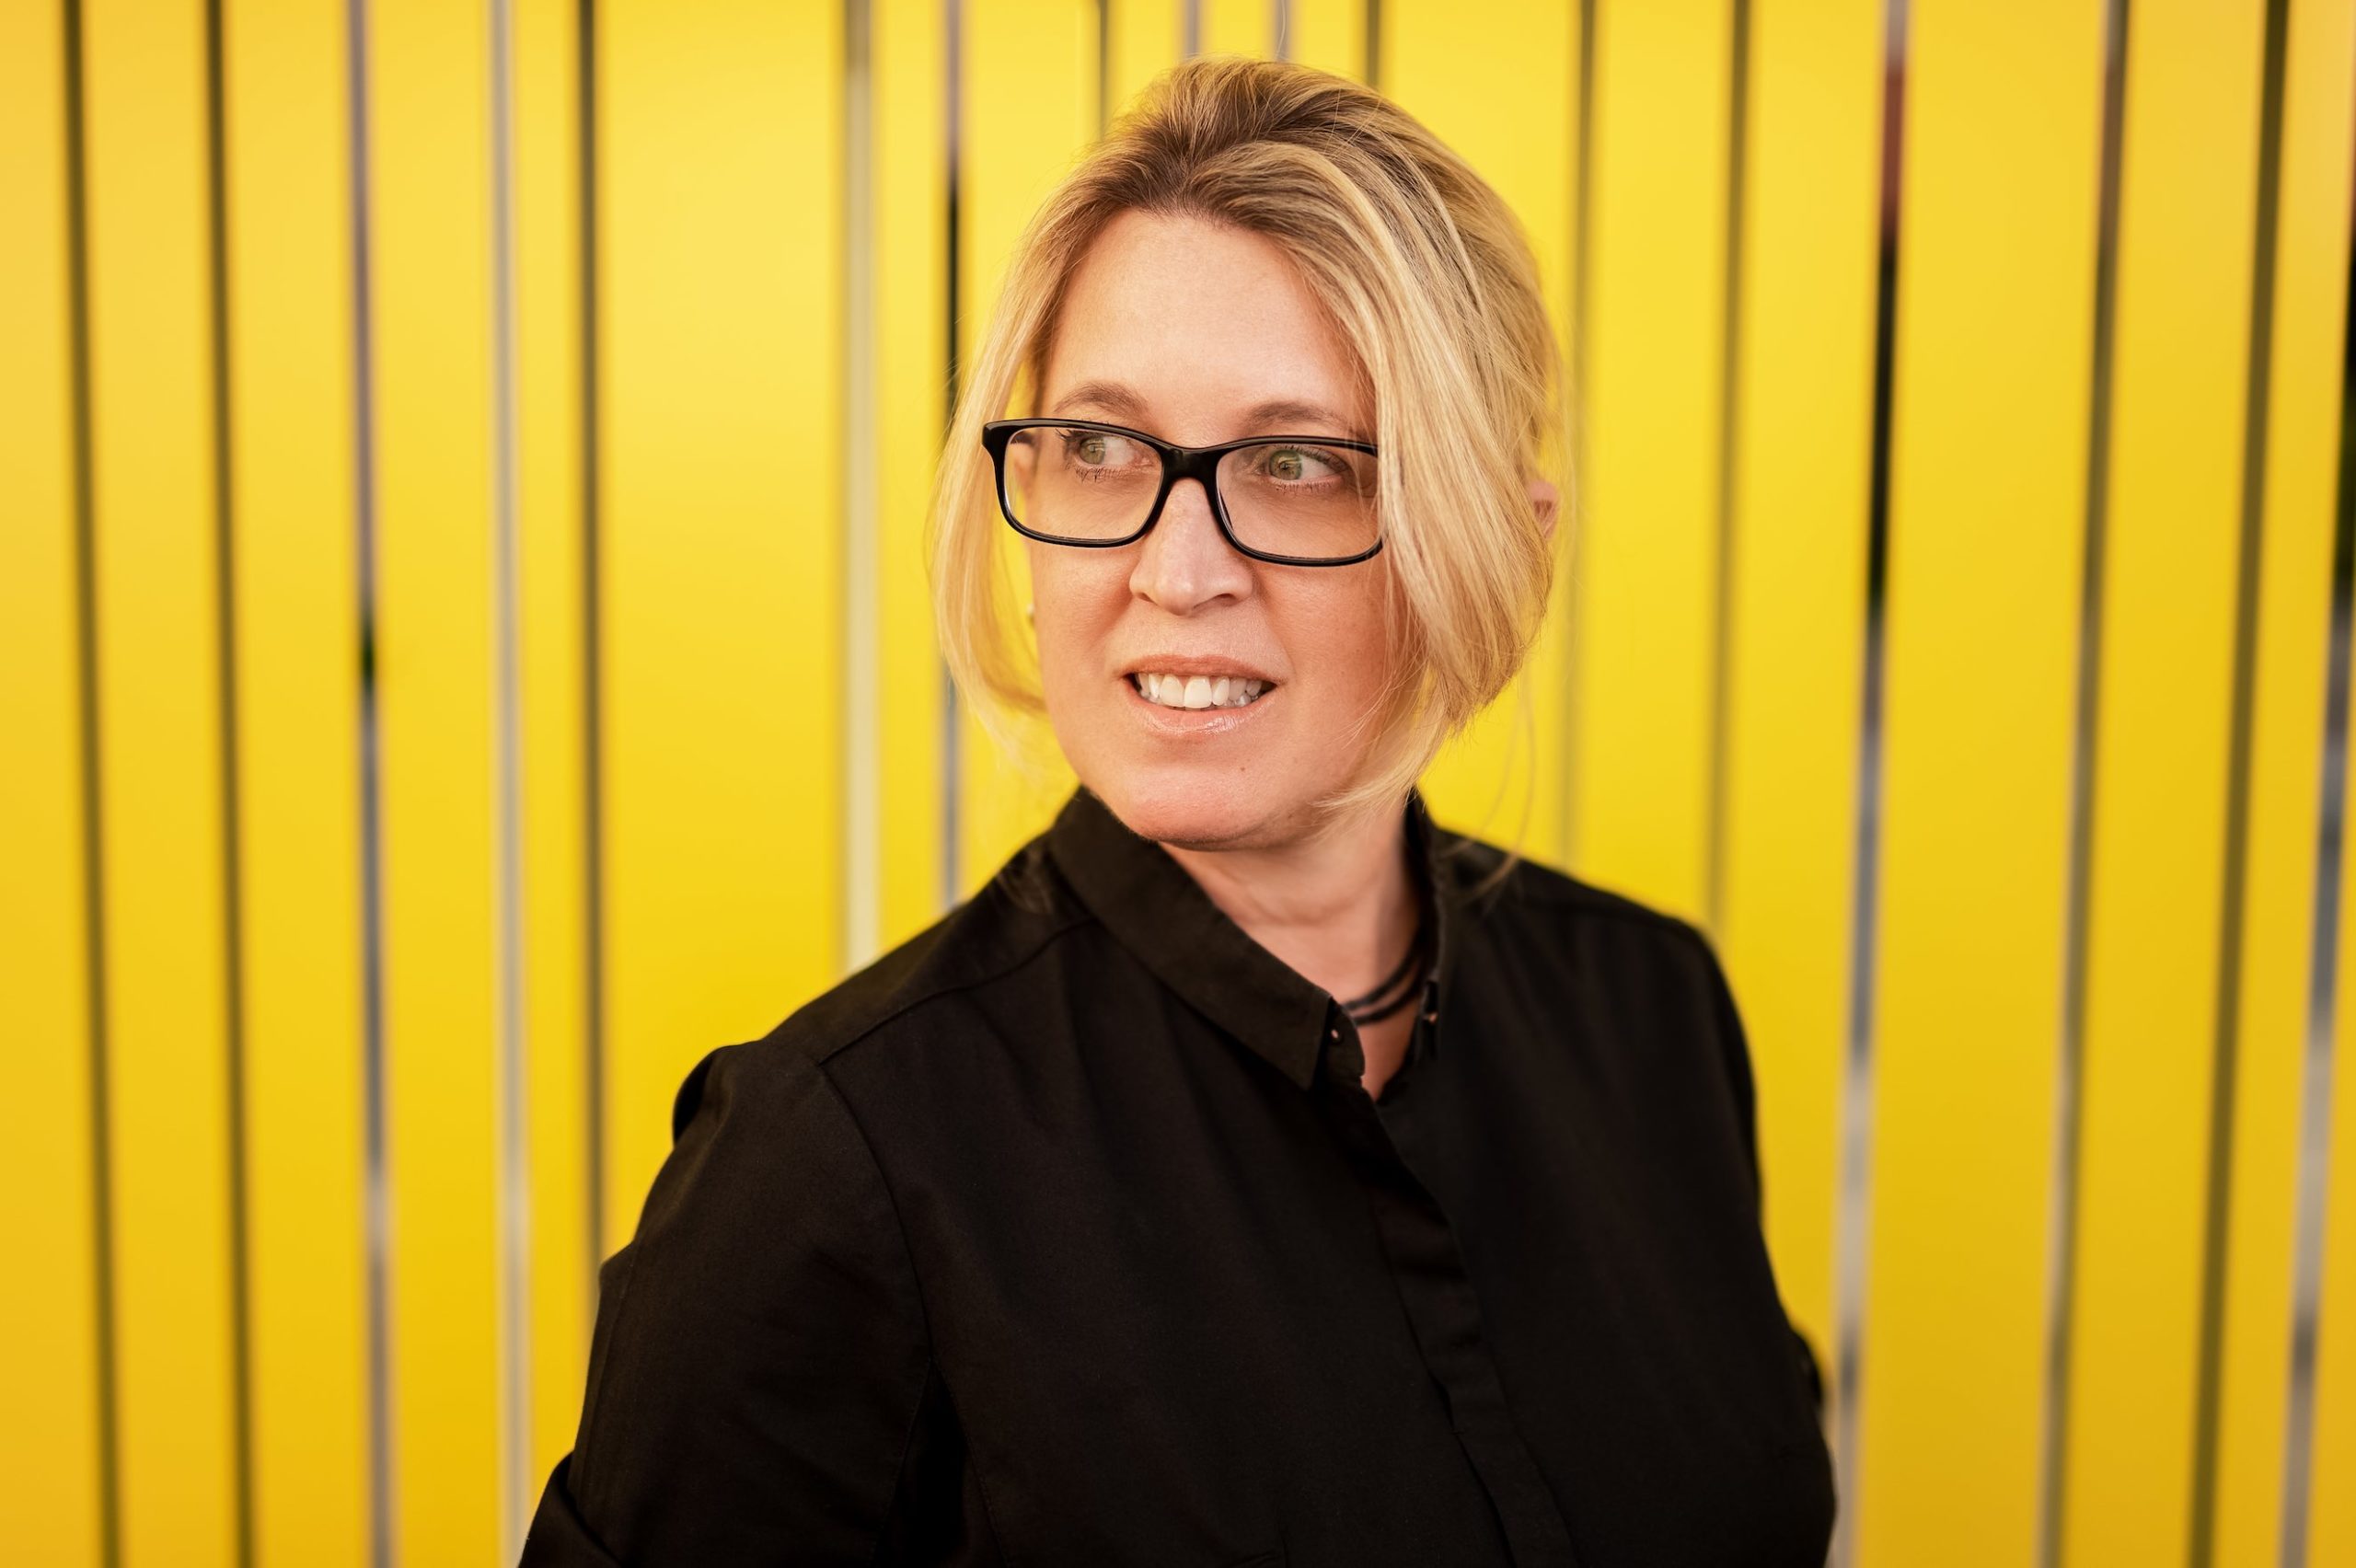 Glavovic Studio Fort Lauderdale Headshot of woman with short blond hair and glasses wearing a black dress shirt posing for camera in front of yellow wall looking off to the side